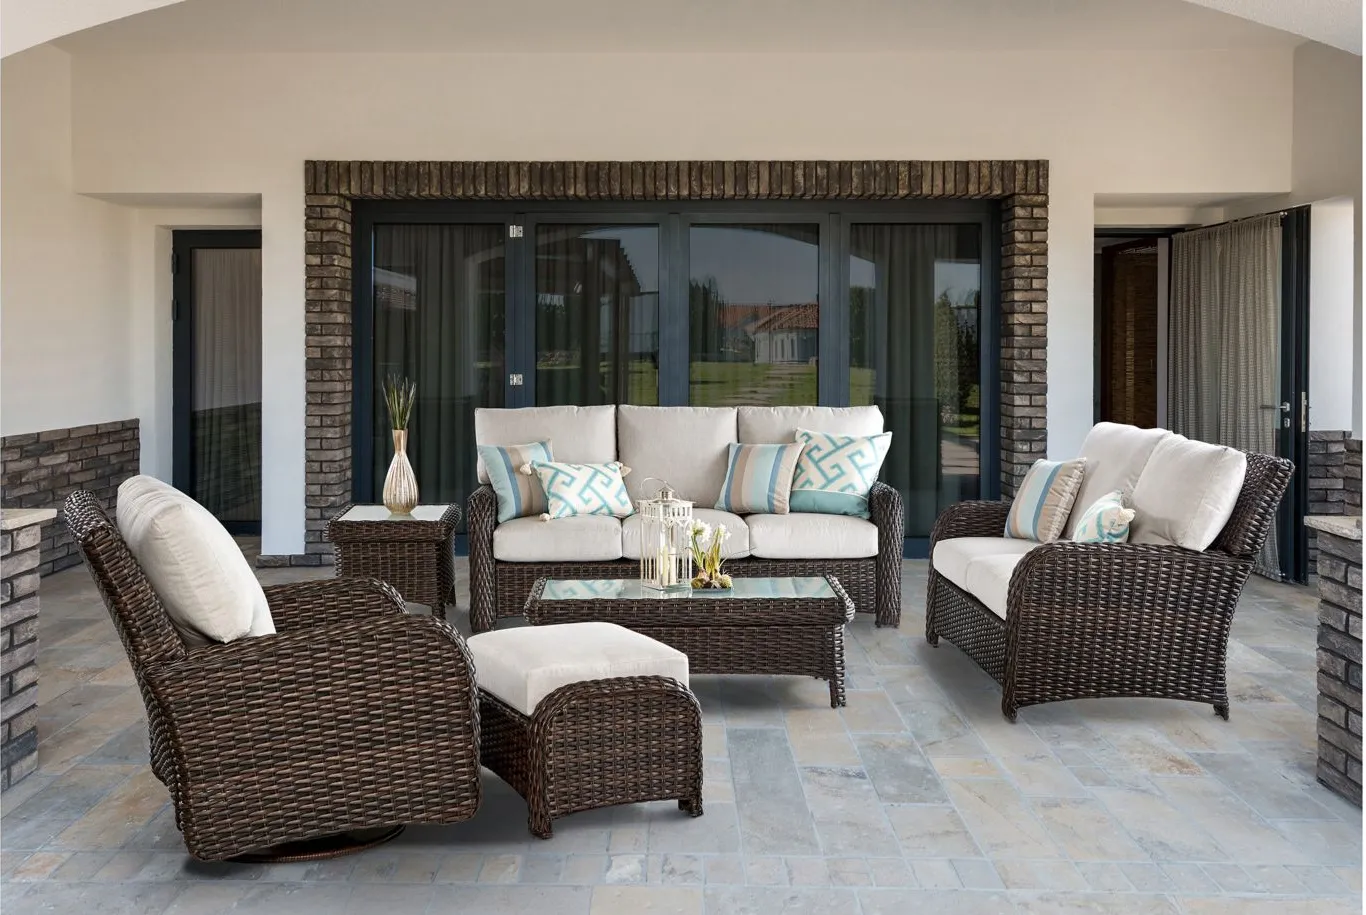 St Tropez 5 Pc. Patio Set in Tobacco by South Sea Outdoor Living